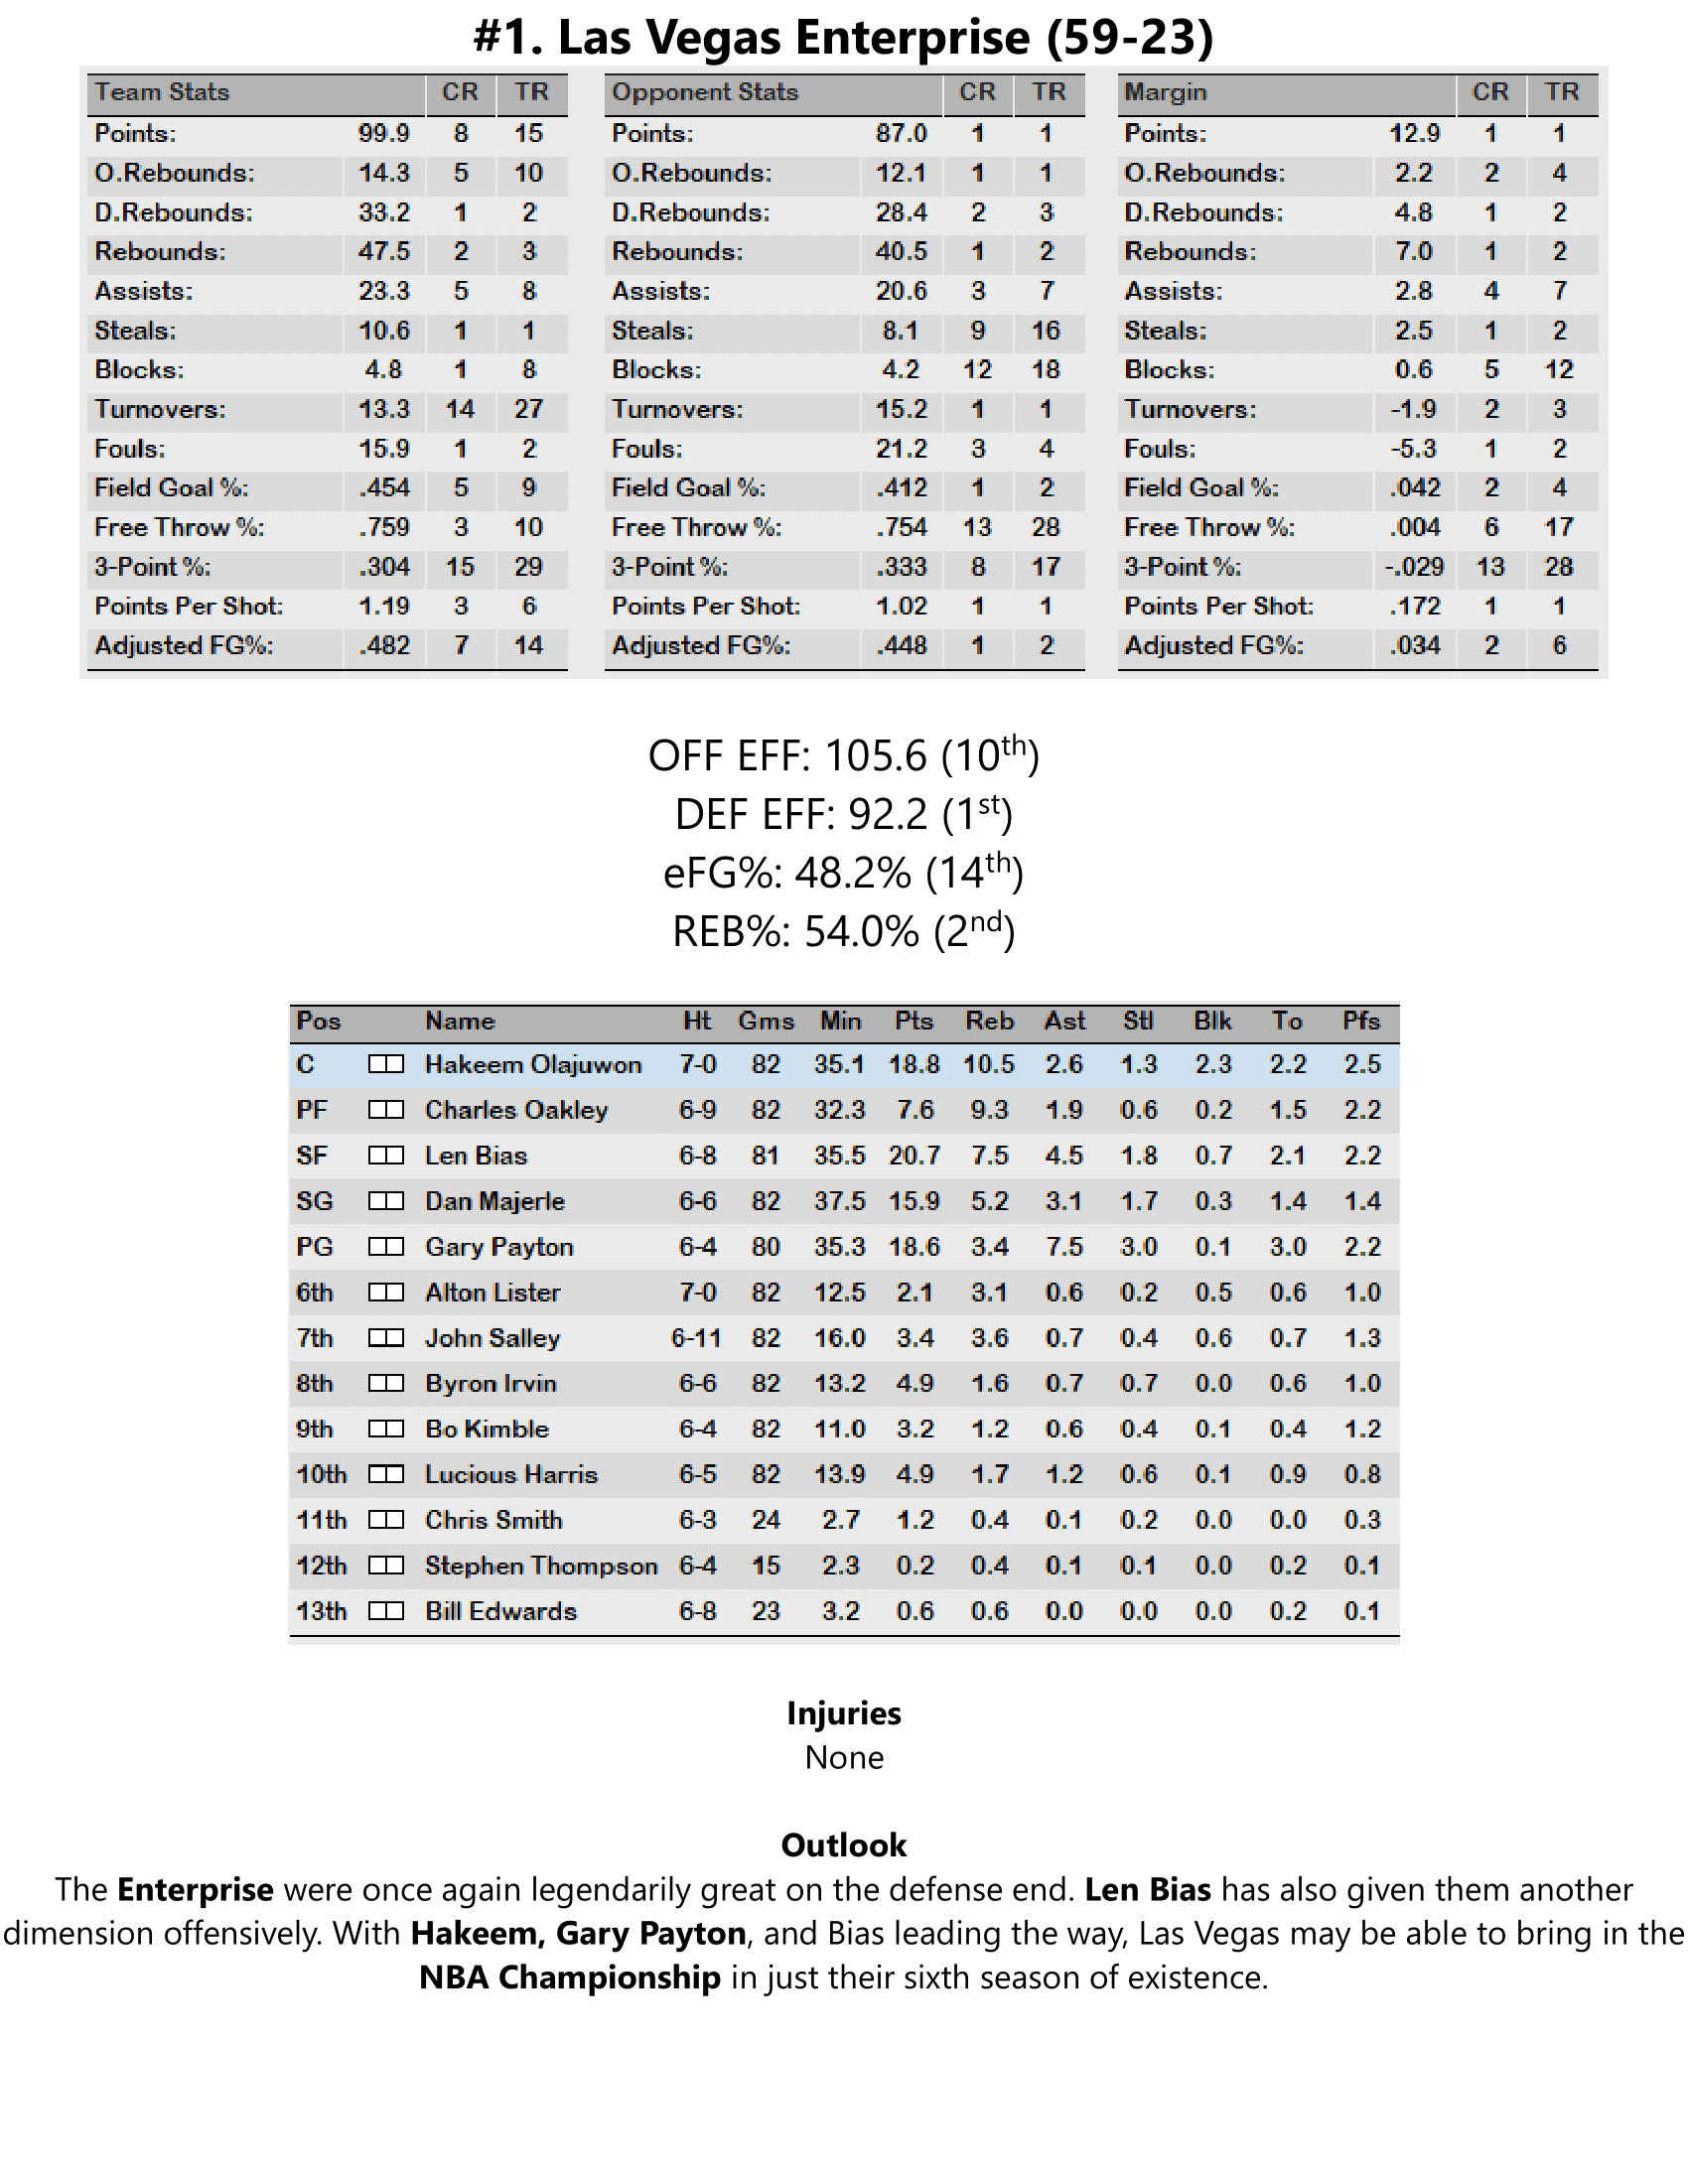 94-95-Part-3-Playoff-Preview-02.png